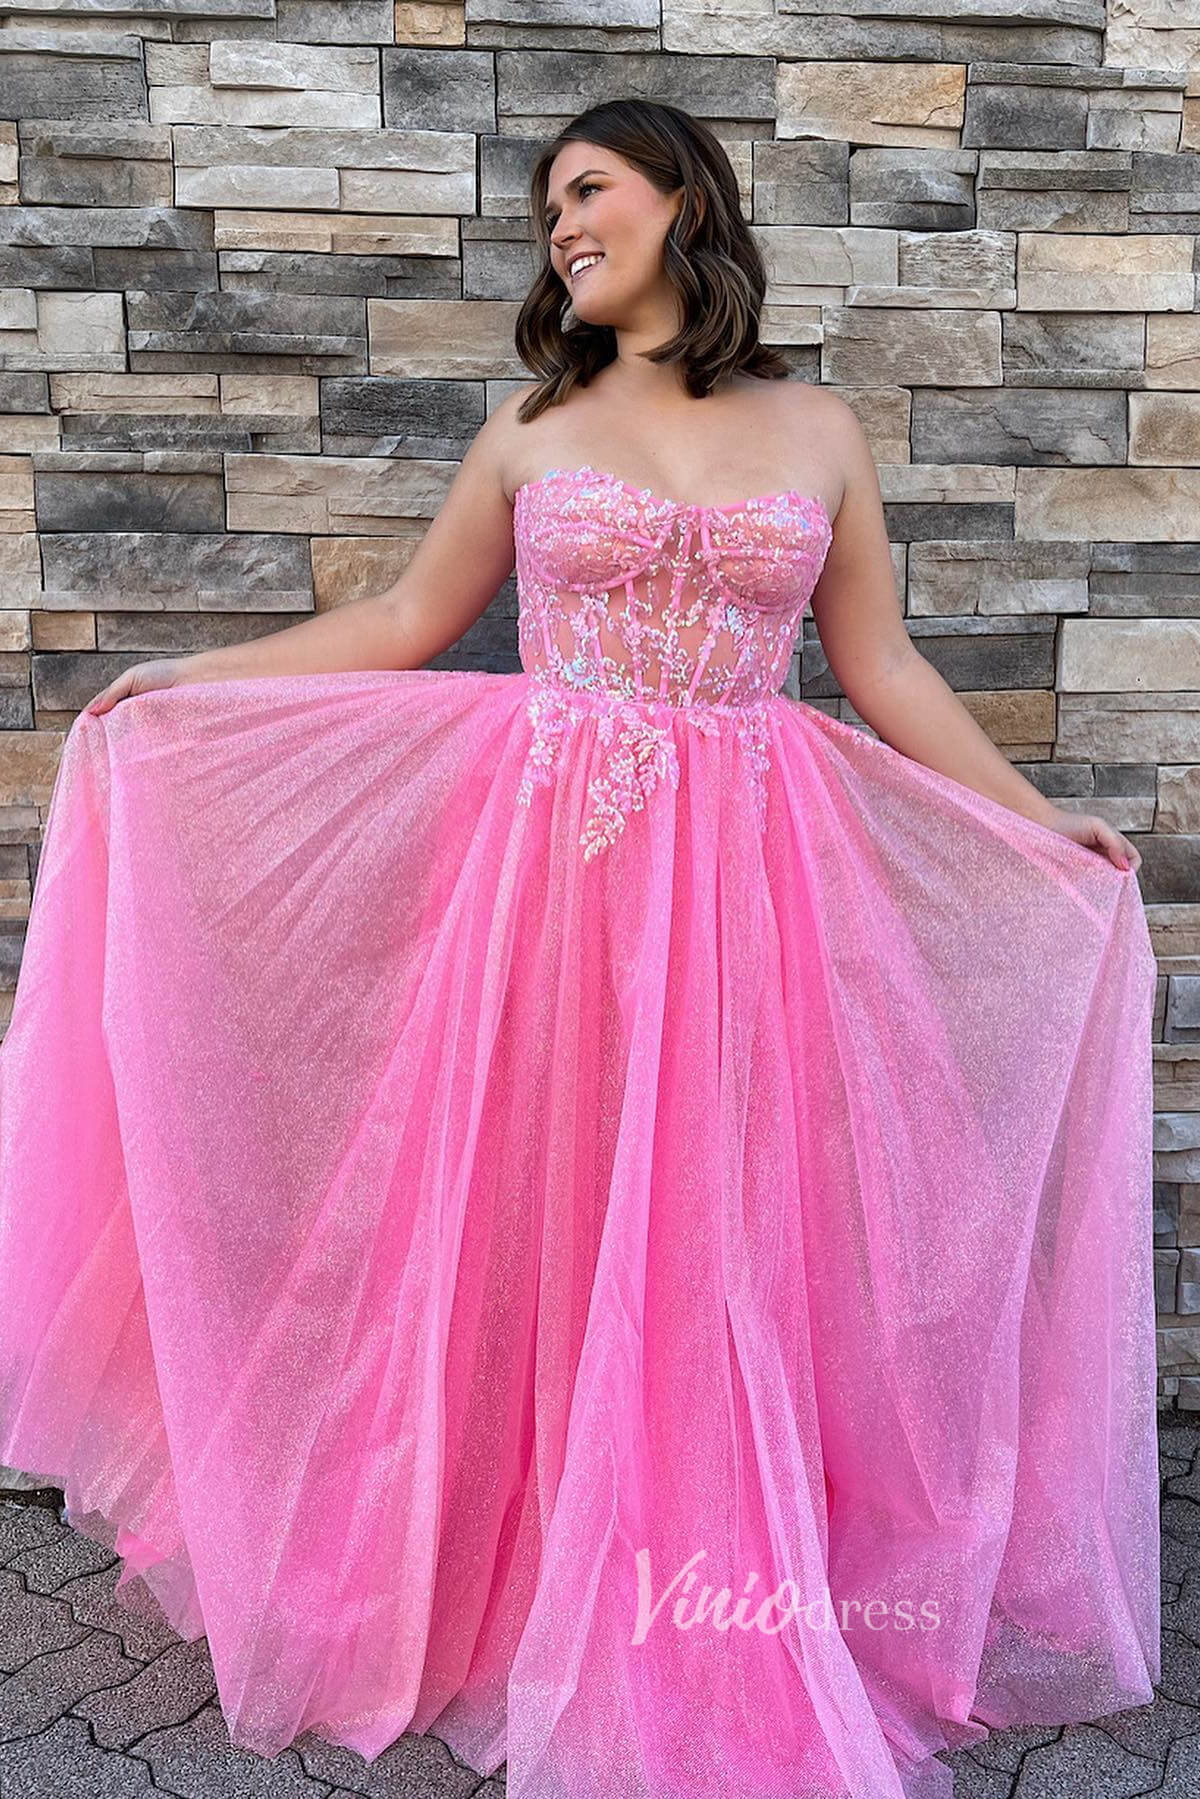 Strapless Pink Prom Dress with Beaded Lace Applique Bodice and Sparkly Tulle Bottom FD3473-prom dresses-Viniodress-Pink-Custom Size-Viniodress